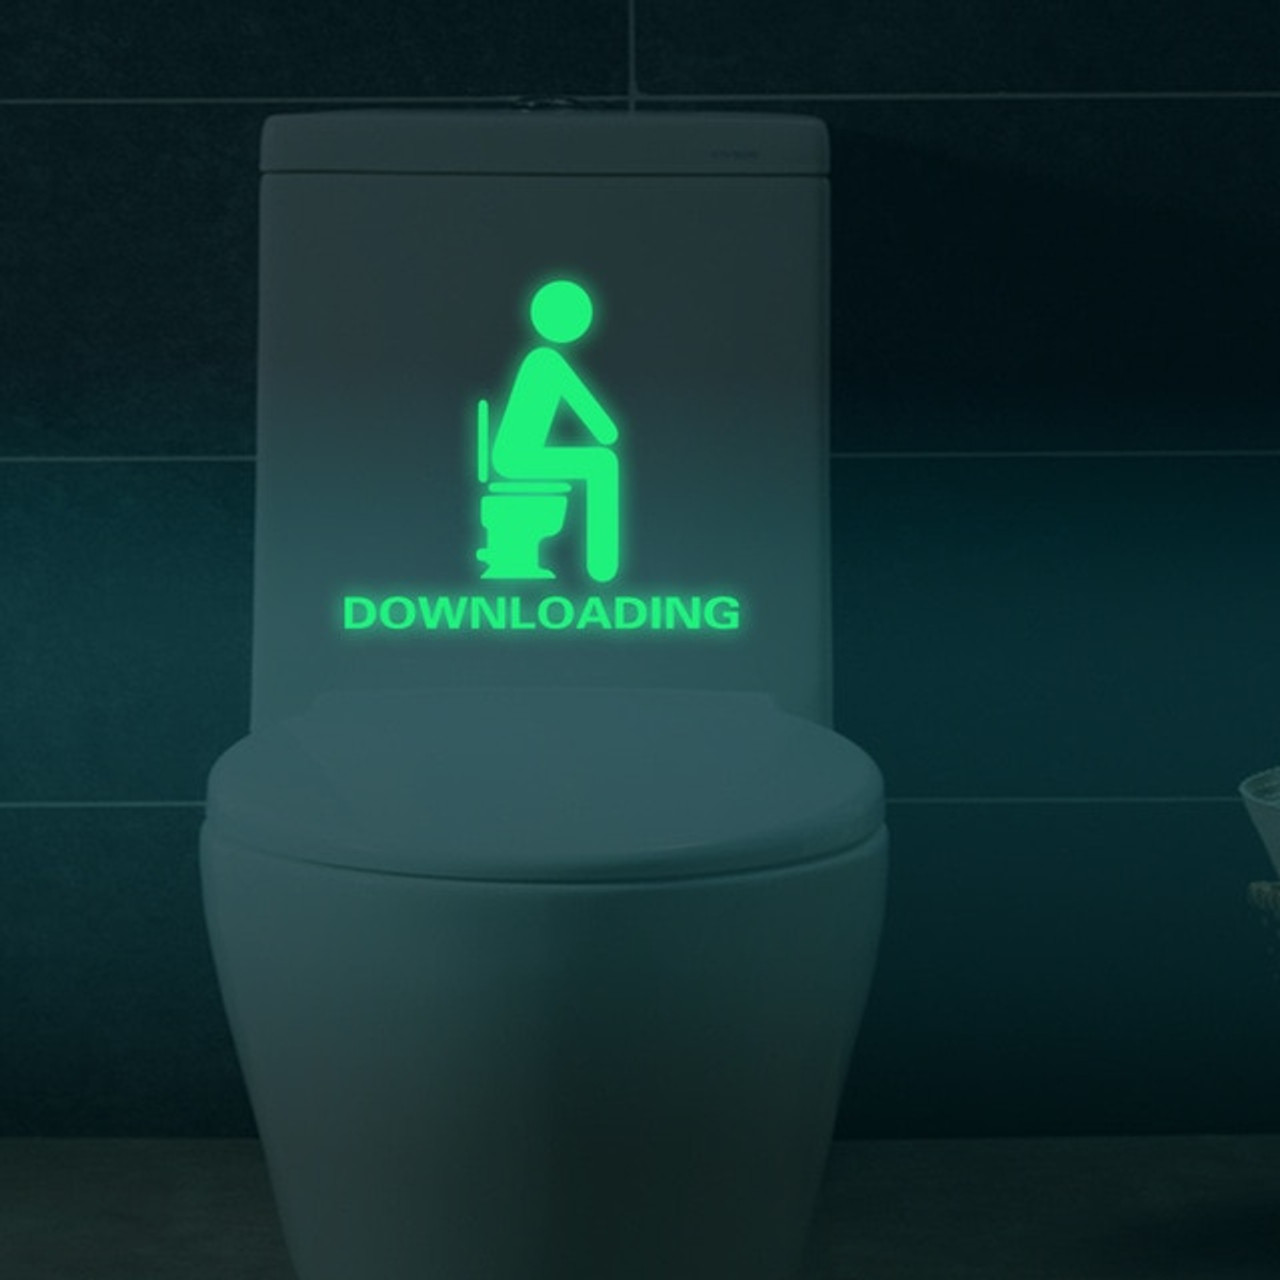 https://cdn11.bigcommerce.com/s-x6jel/images/stencil/1280x1280/products/252/688/Glow_in_the_dark_toilet_stickers_Dowloading__06470.1547244267.jpg?c=2